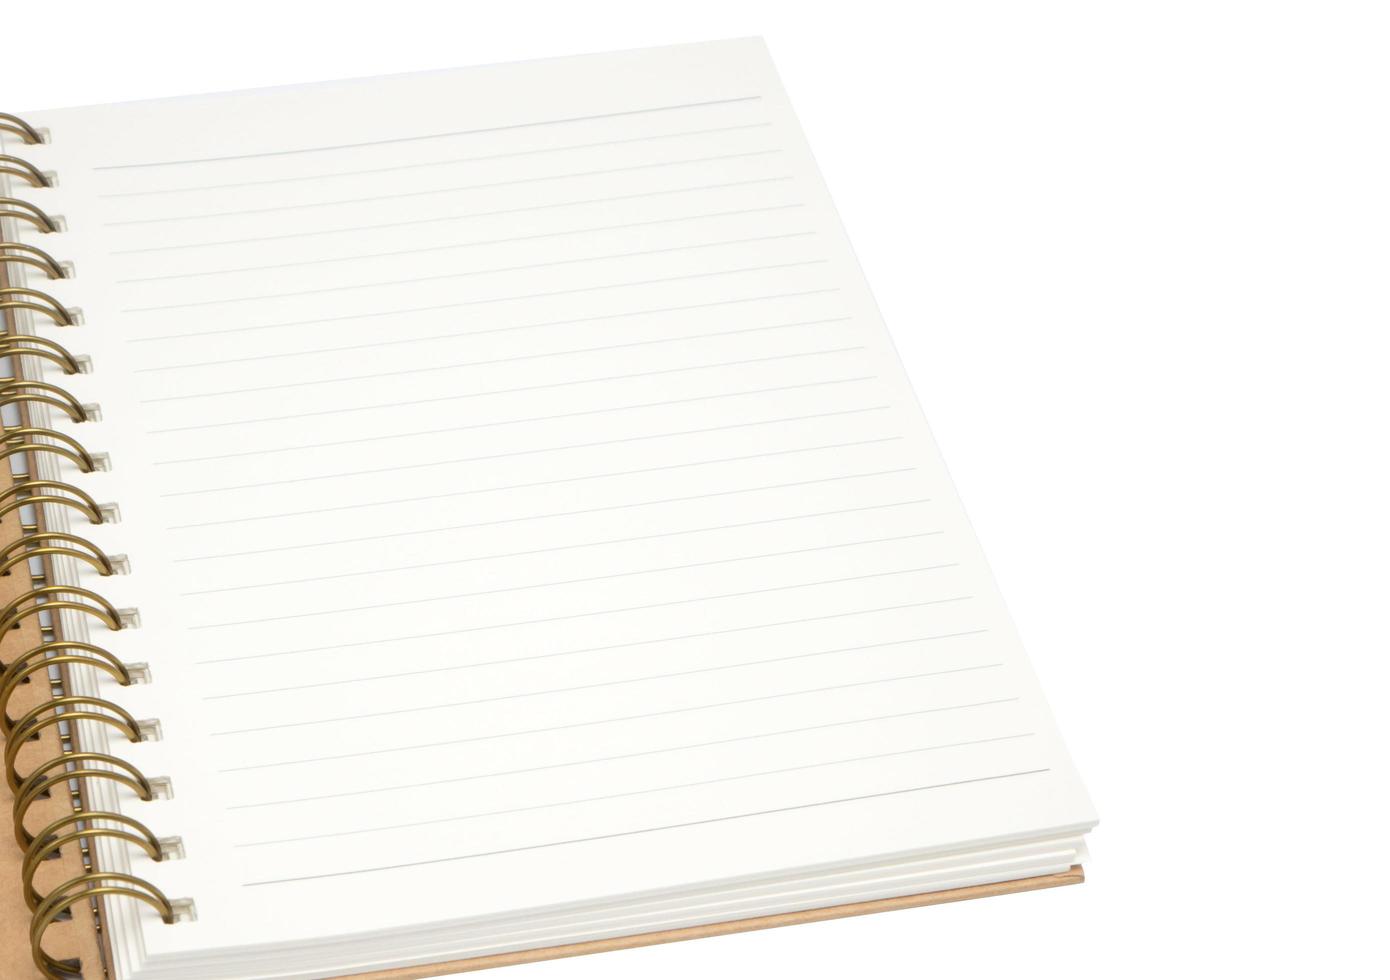 Blank paper notebook on white background photo